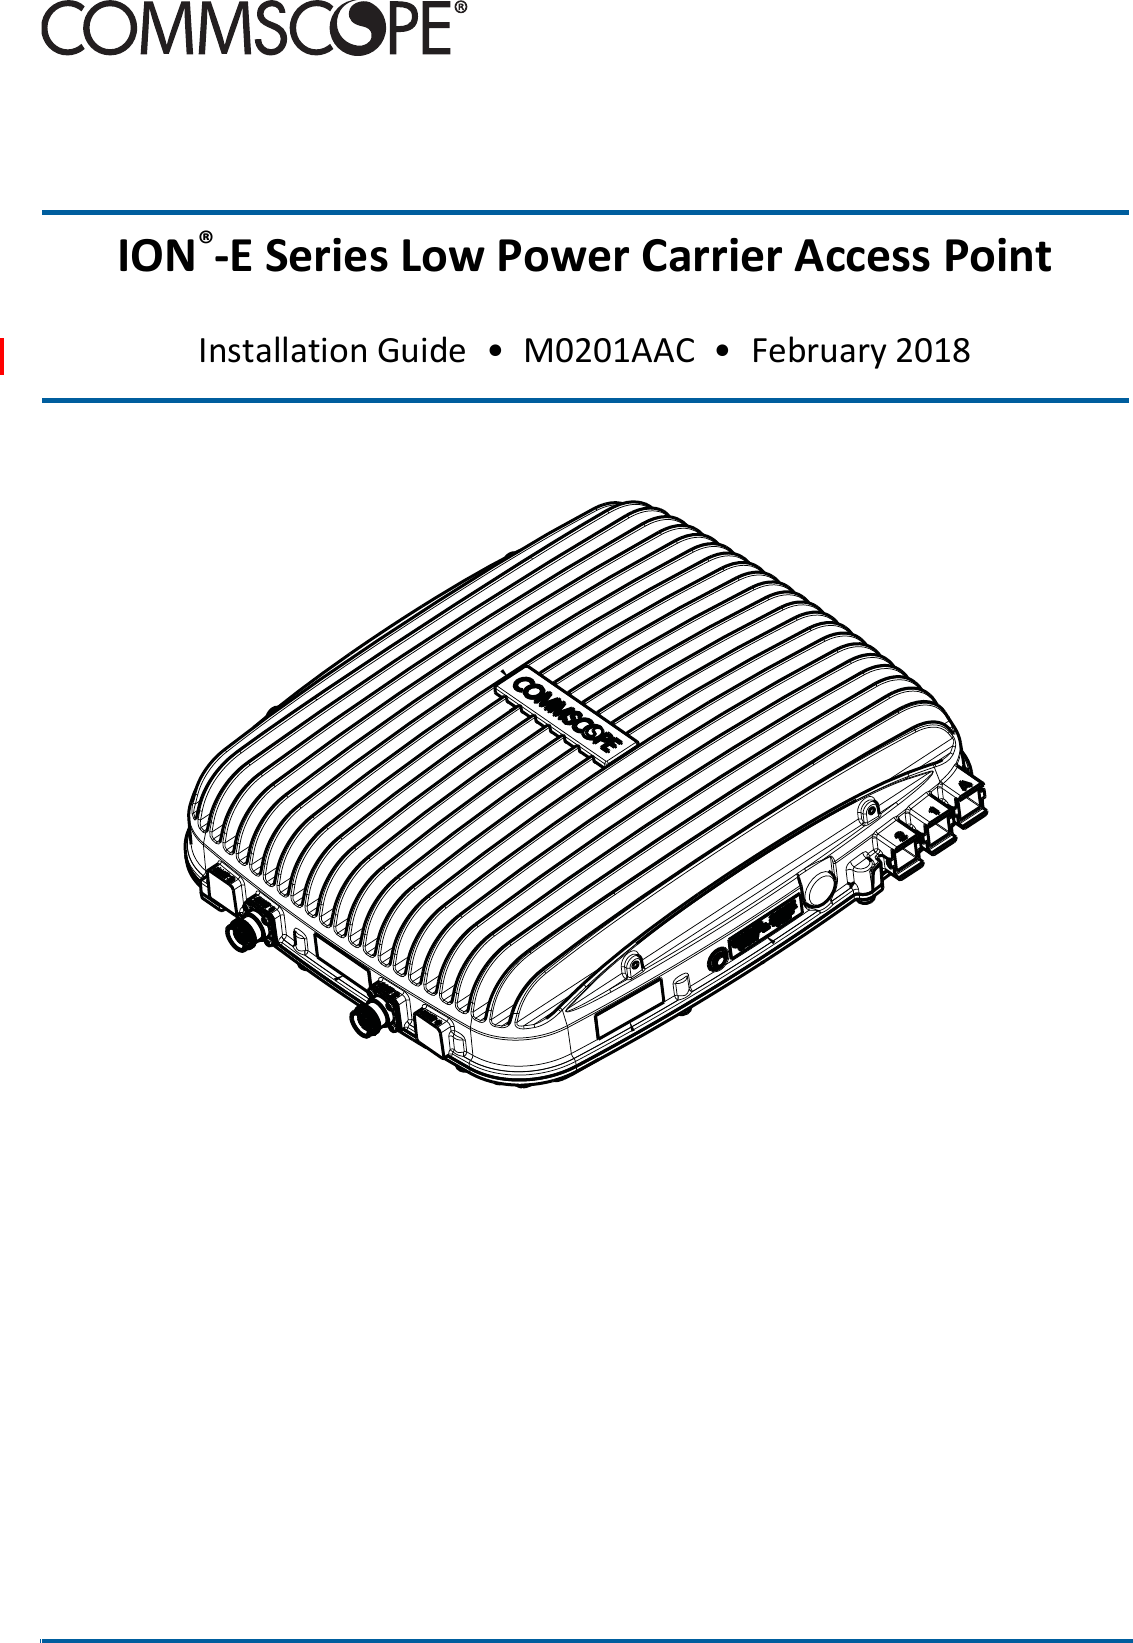  ION®-E Series Low Power Carrier Access PointInstallation Guide  •  M0201AAC  •  February 2018